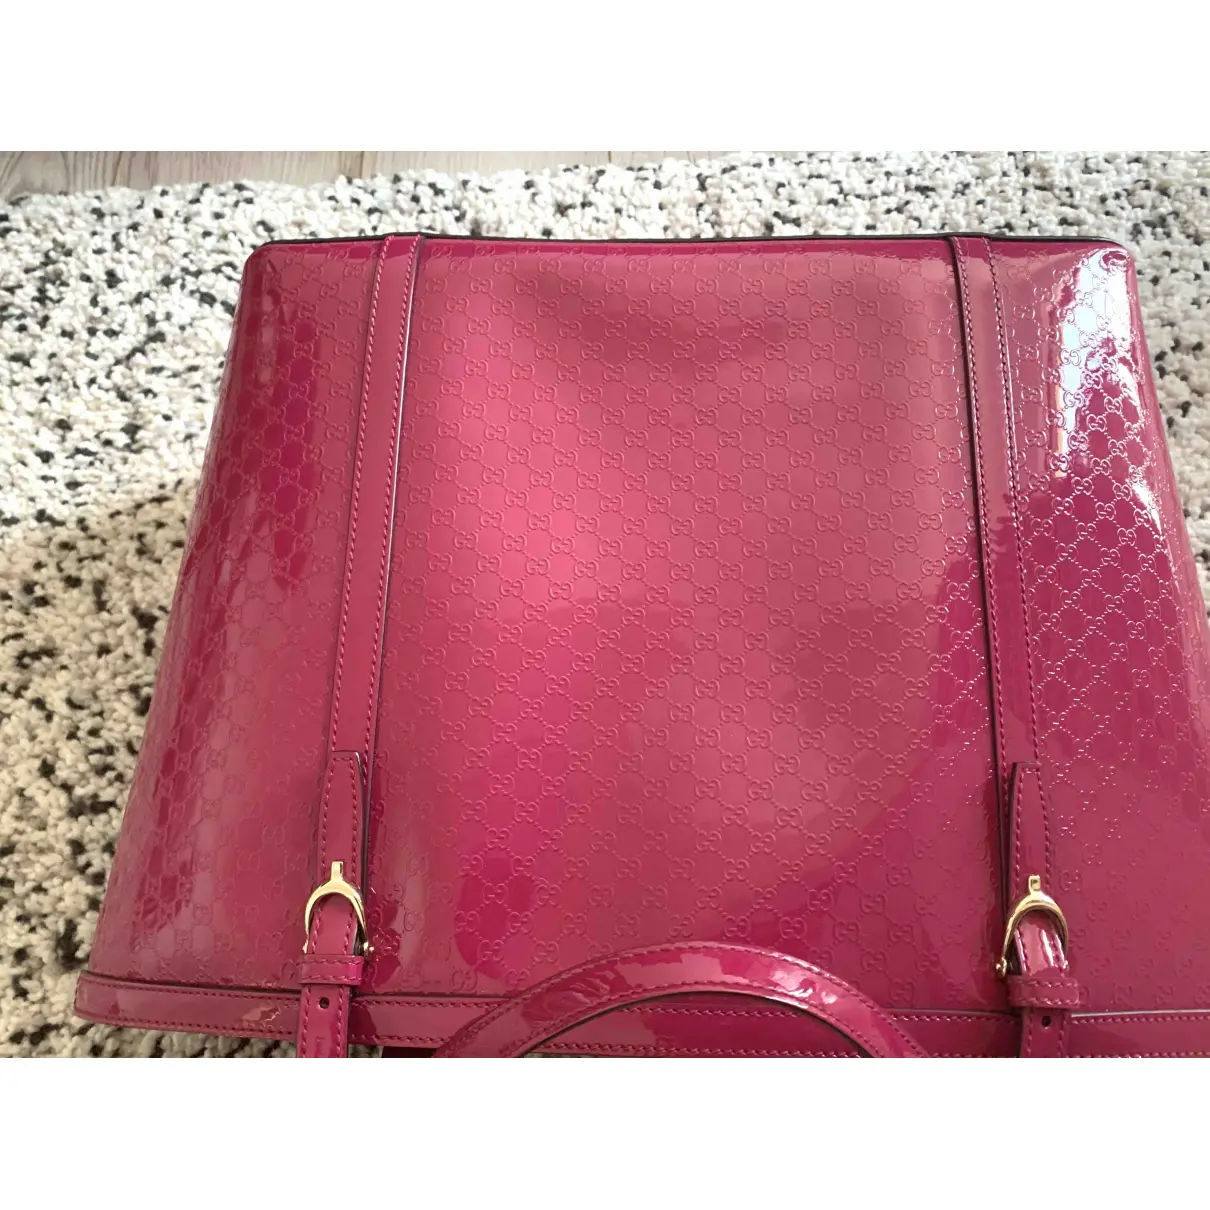 Buy Gucci Patent leather tote online